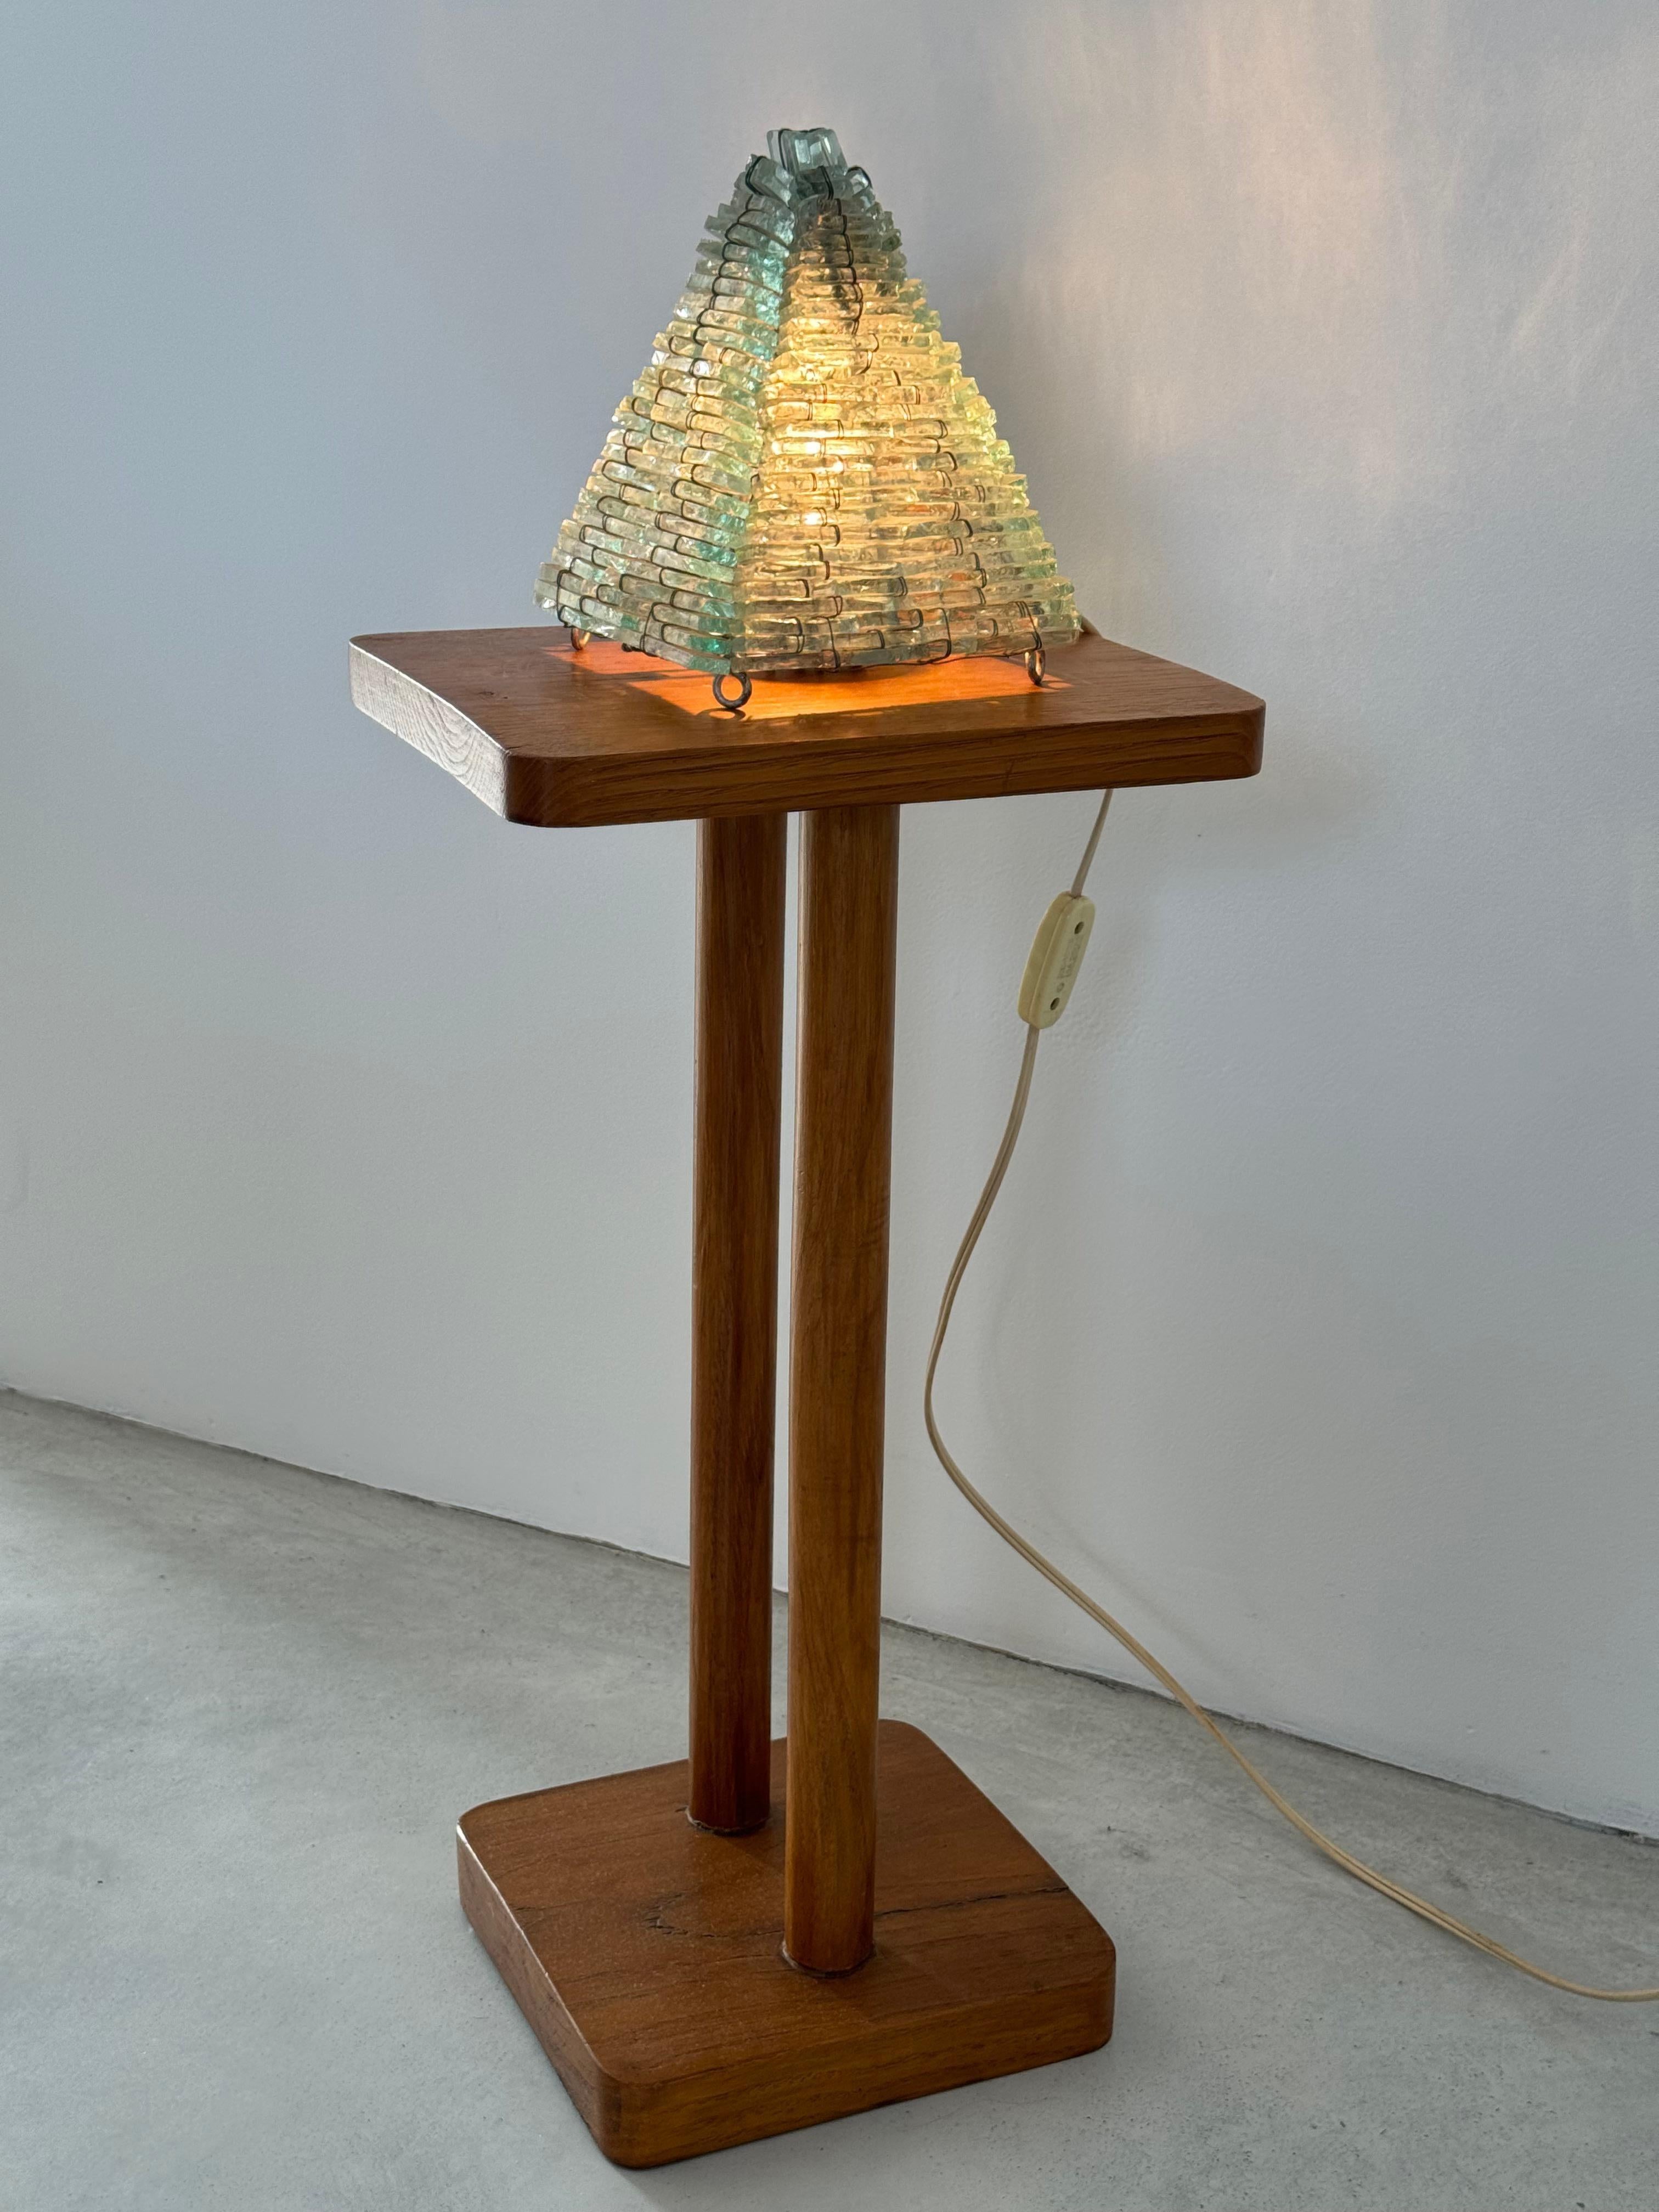 Sculptural Glass Pyramid Table Lamp, French Design 1960s For Sale 9